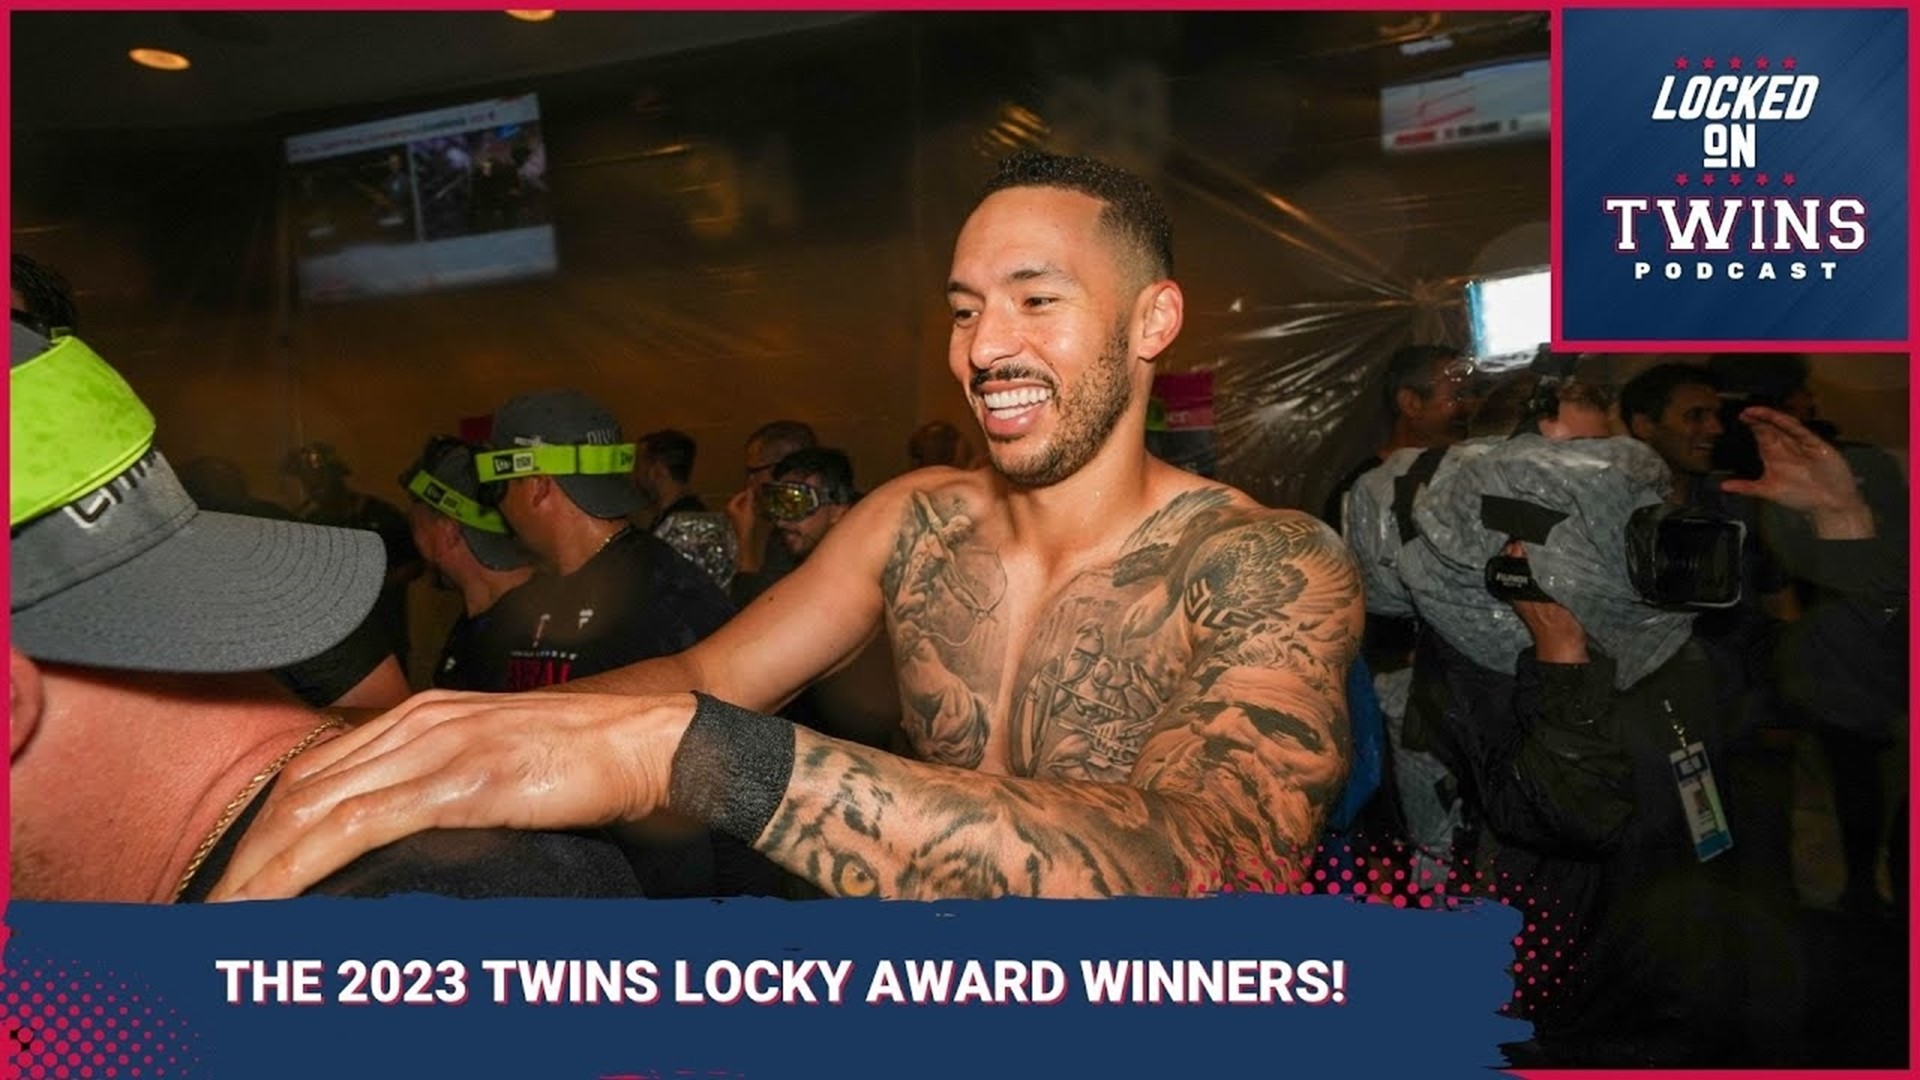 In this edition of Locked On Twins, Brandon hands out his 2023 Twins awards as the team prepares to take on the Jays in the Wild Card Series.